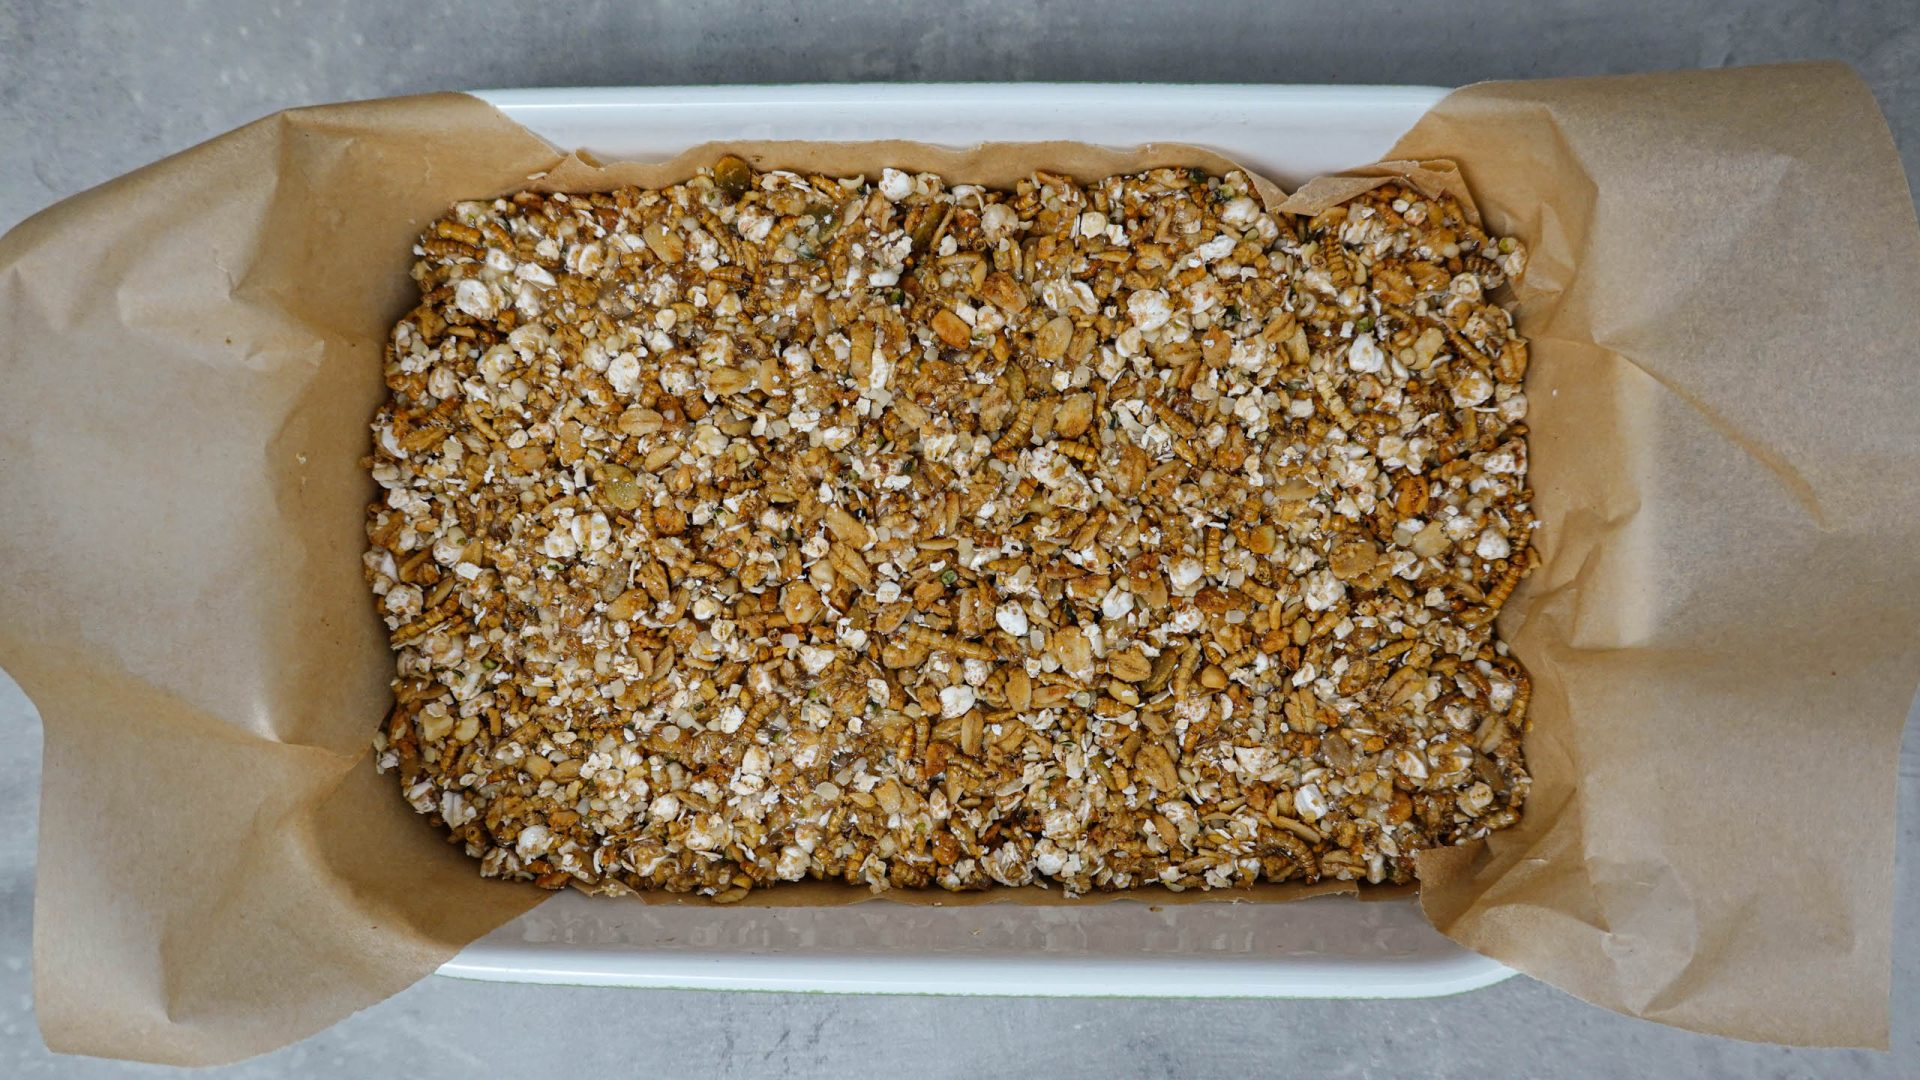 The mixture for the crispy bar in a baking dish